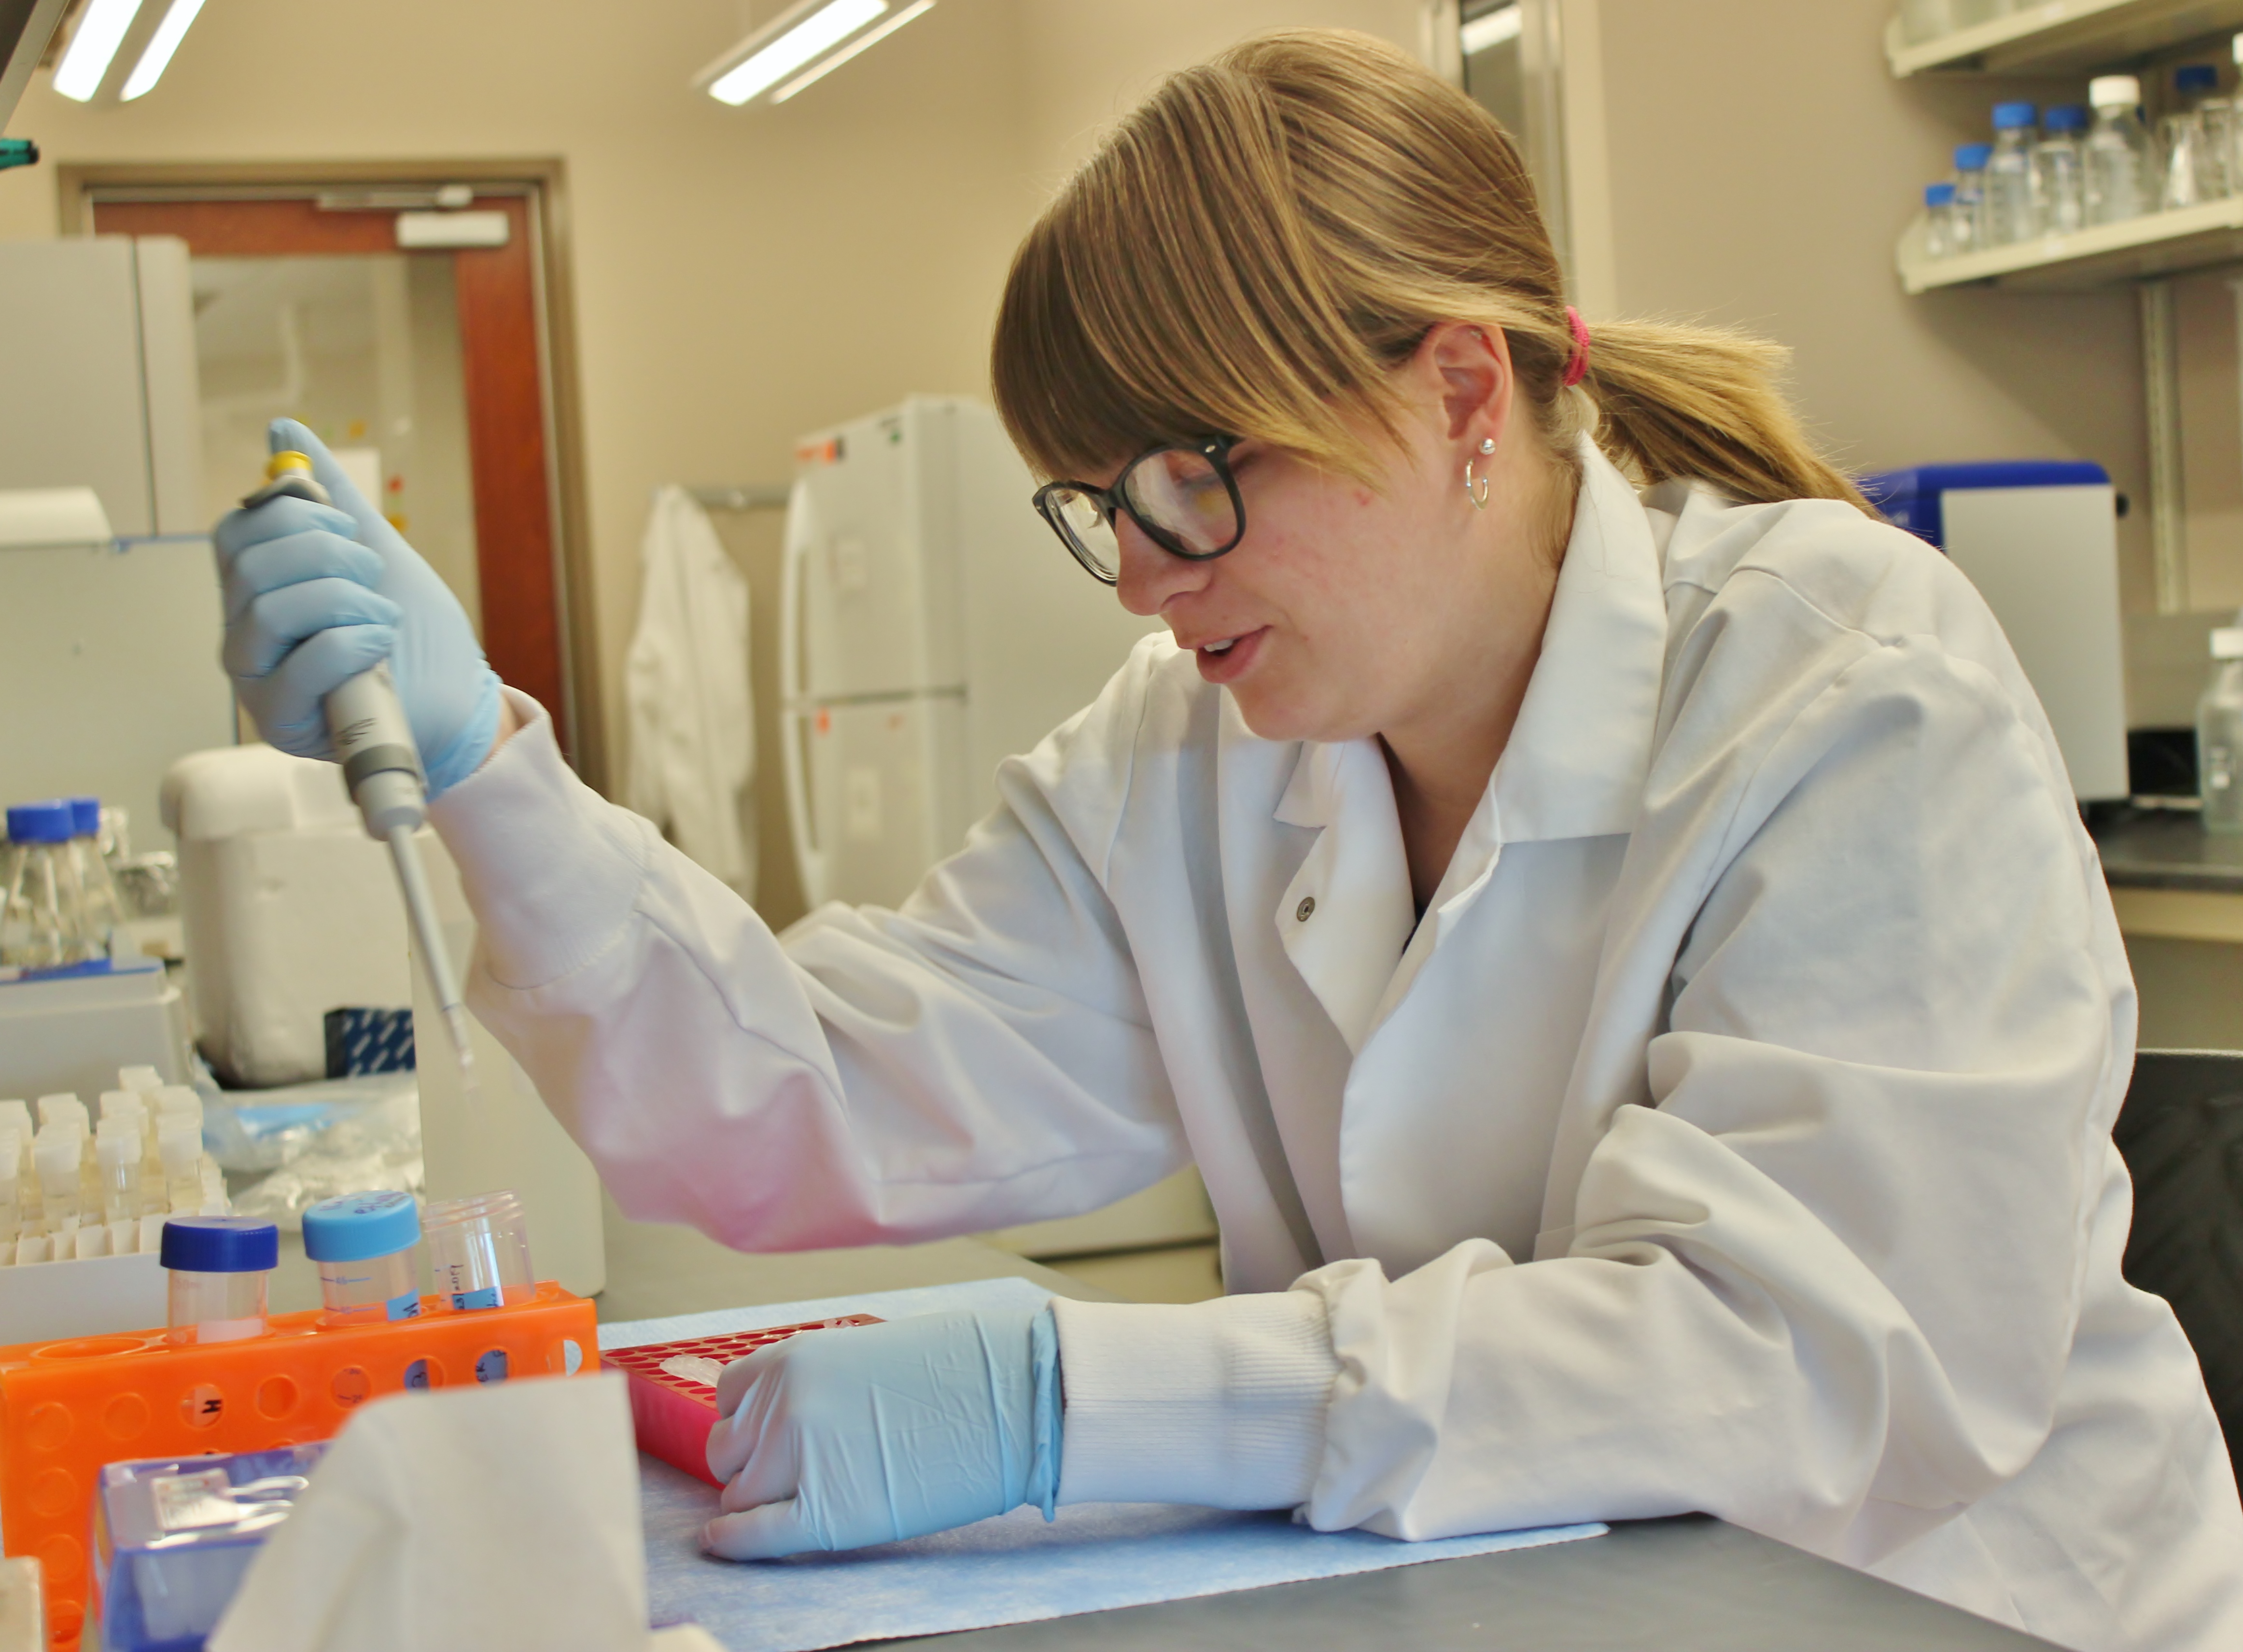 Researcher prepares samples for analysis.